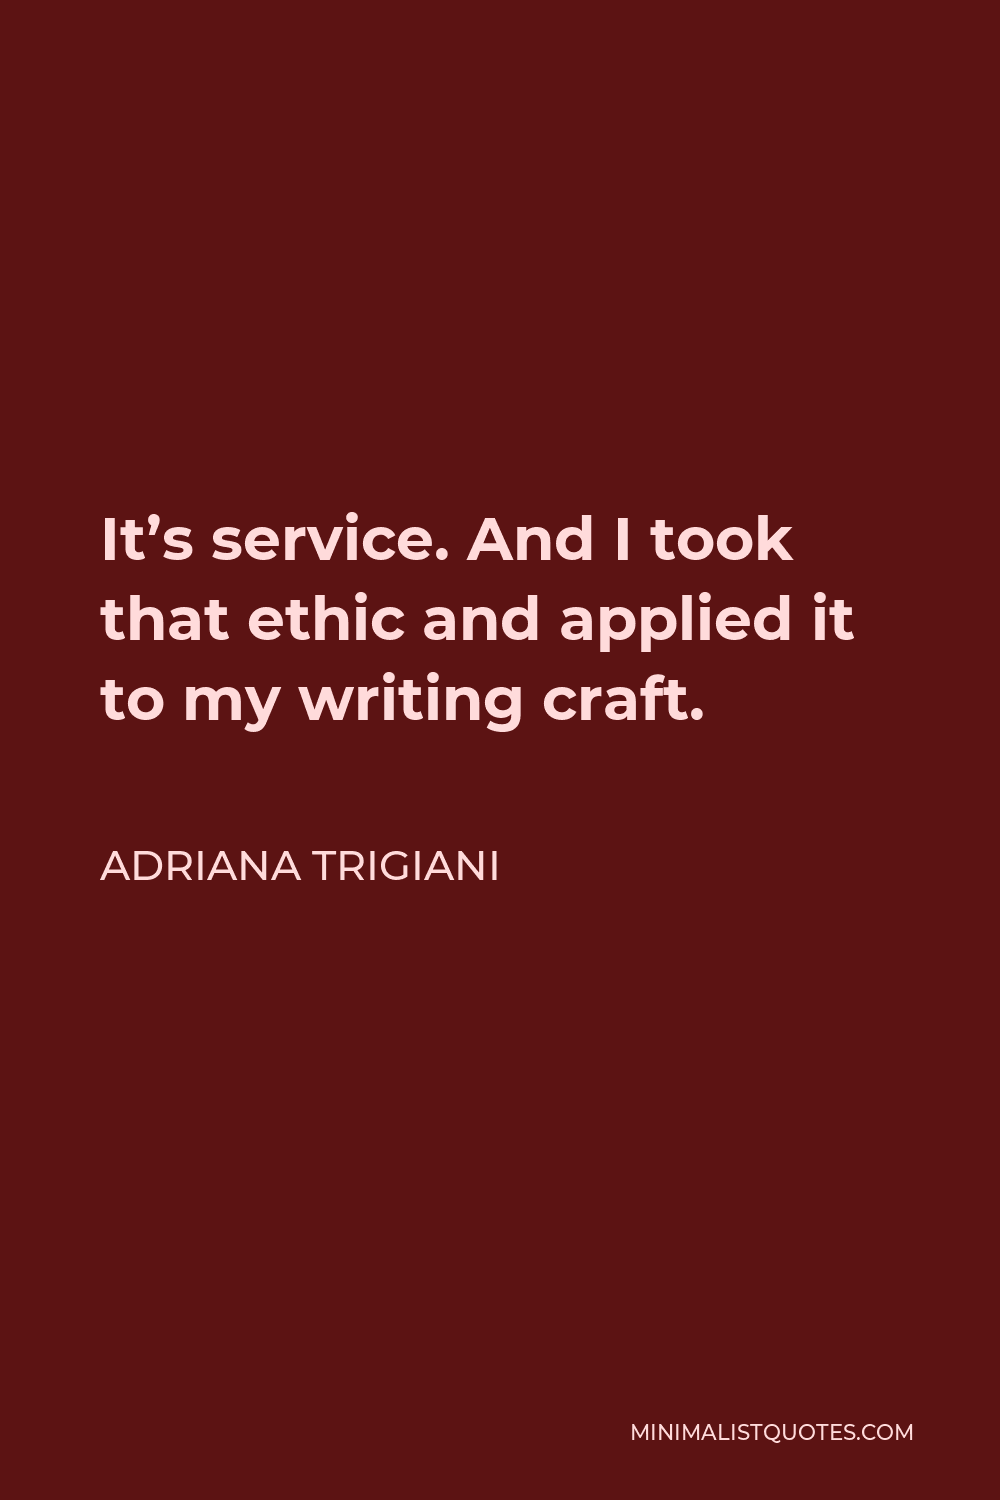 Adriana Trigiani Quote - It’s service. And I took that ethic and applied it to my writing craft.